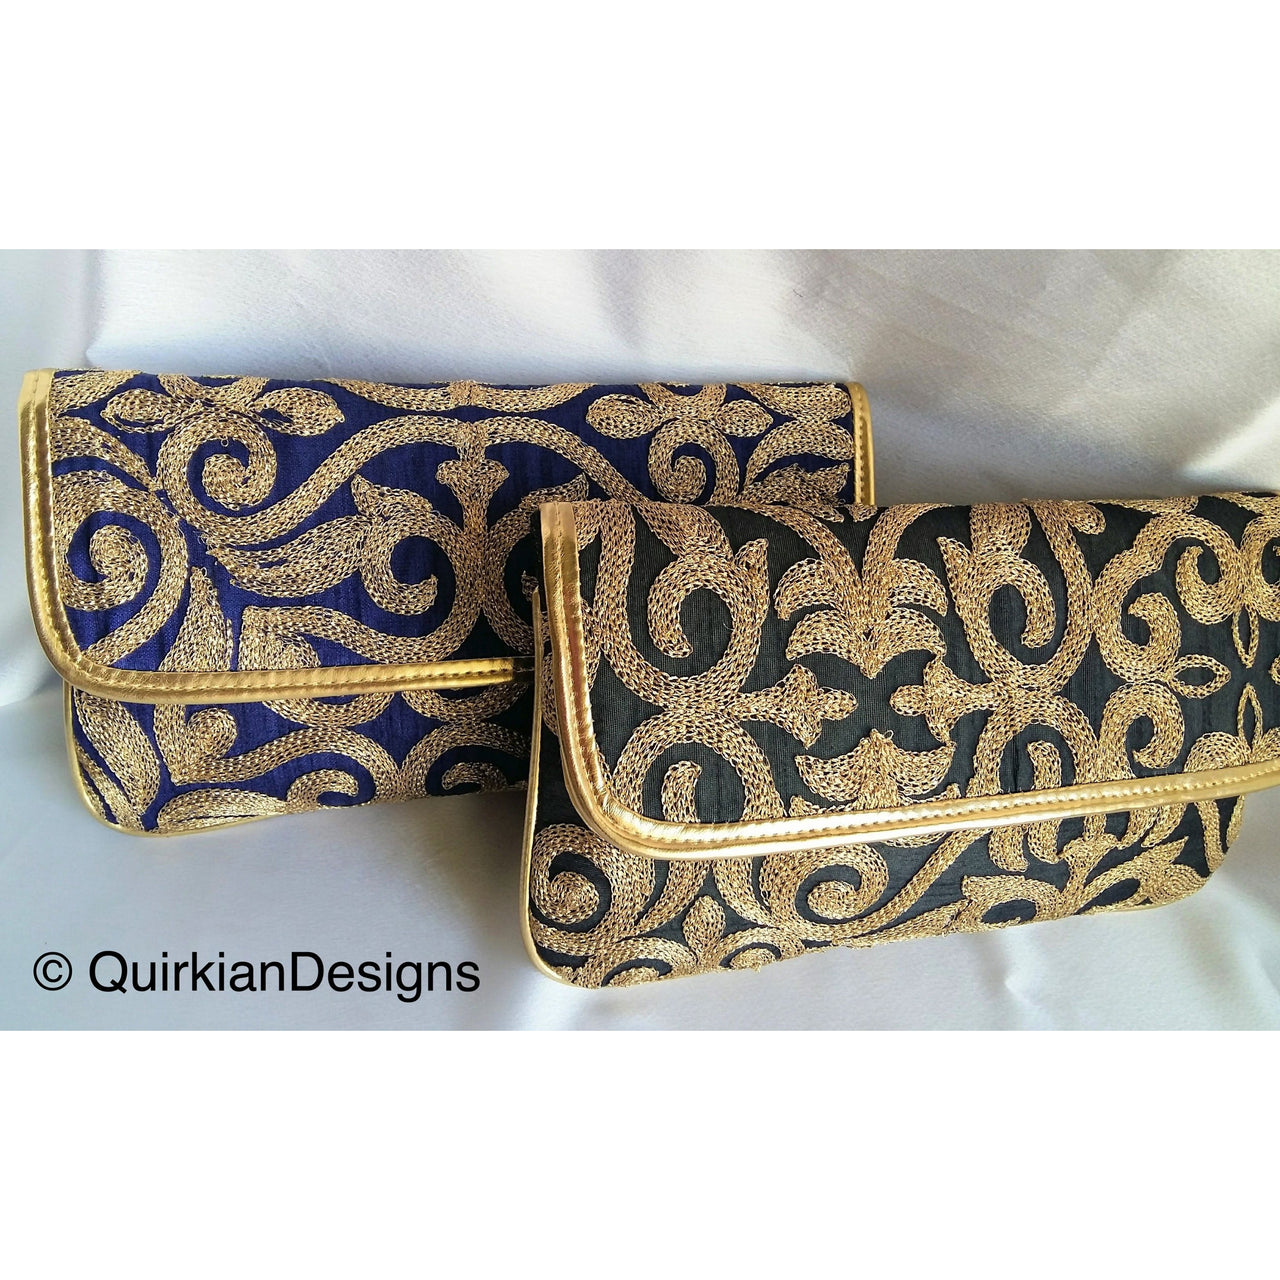 Blue Fabric Clutch Purse With Gold Intricate Embroidery, Wedding Clutch, Party Bag, Blue And Gold Clutch